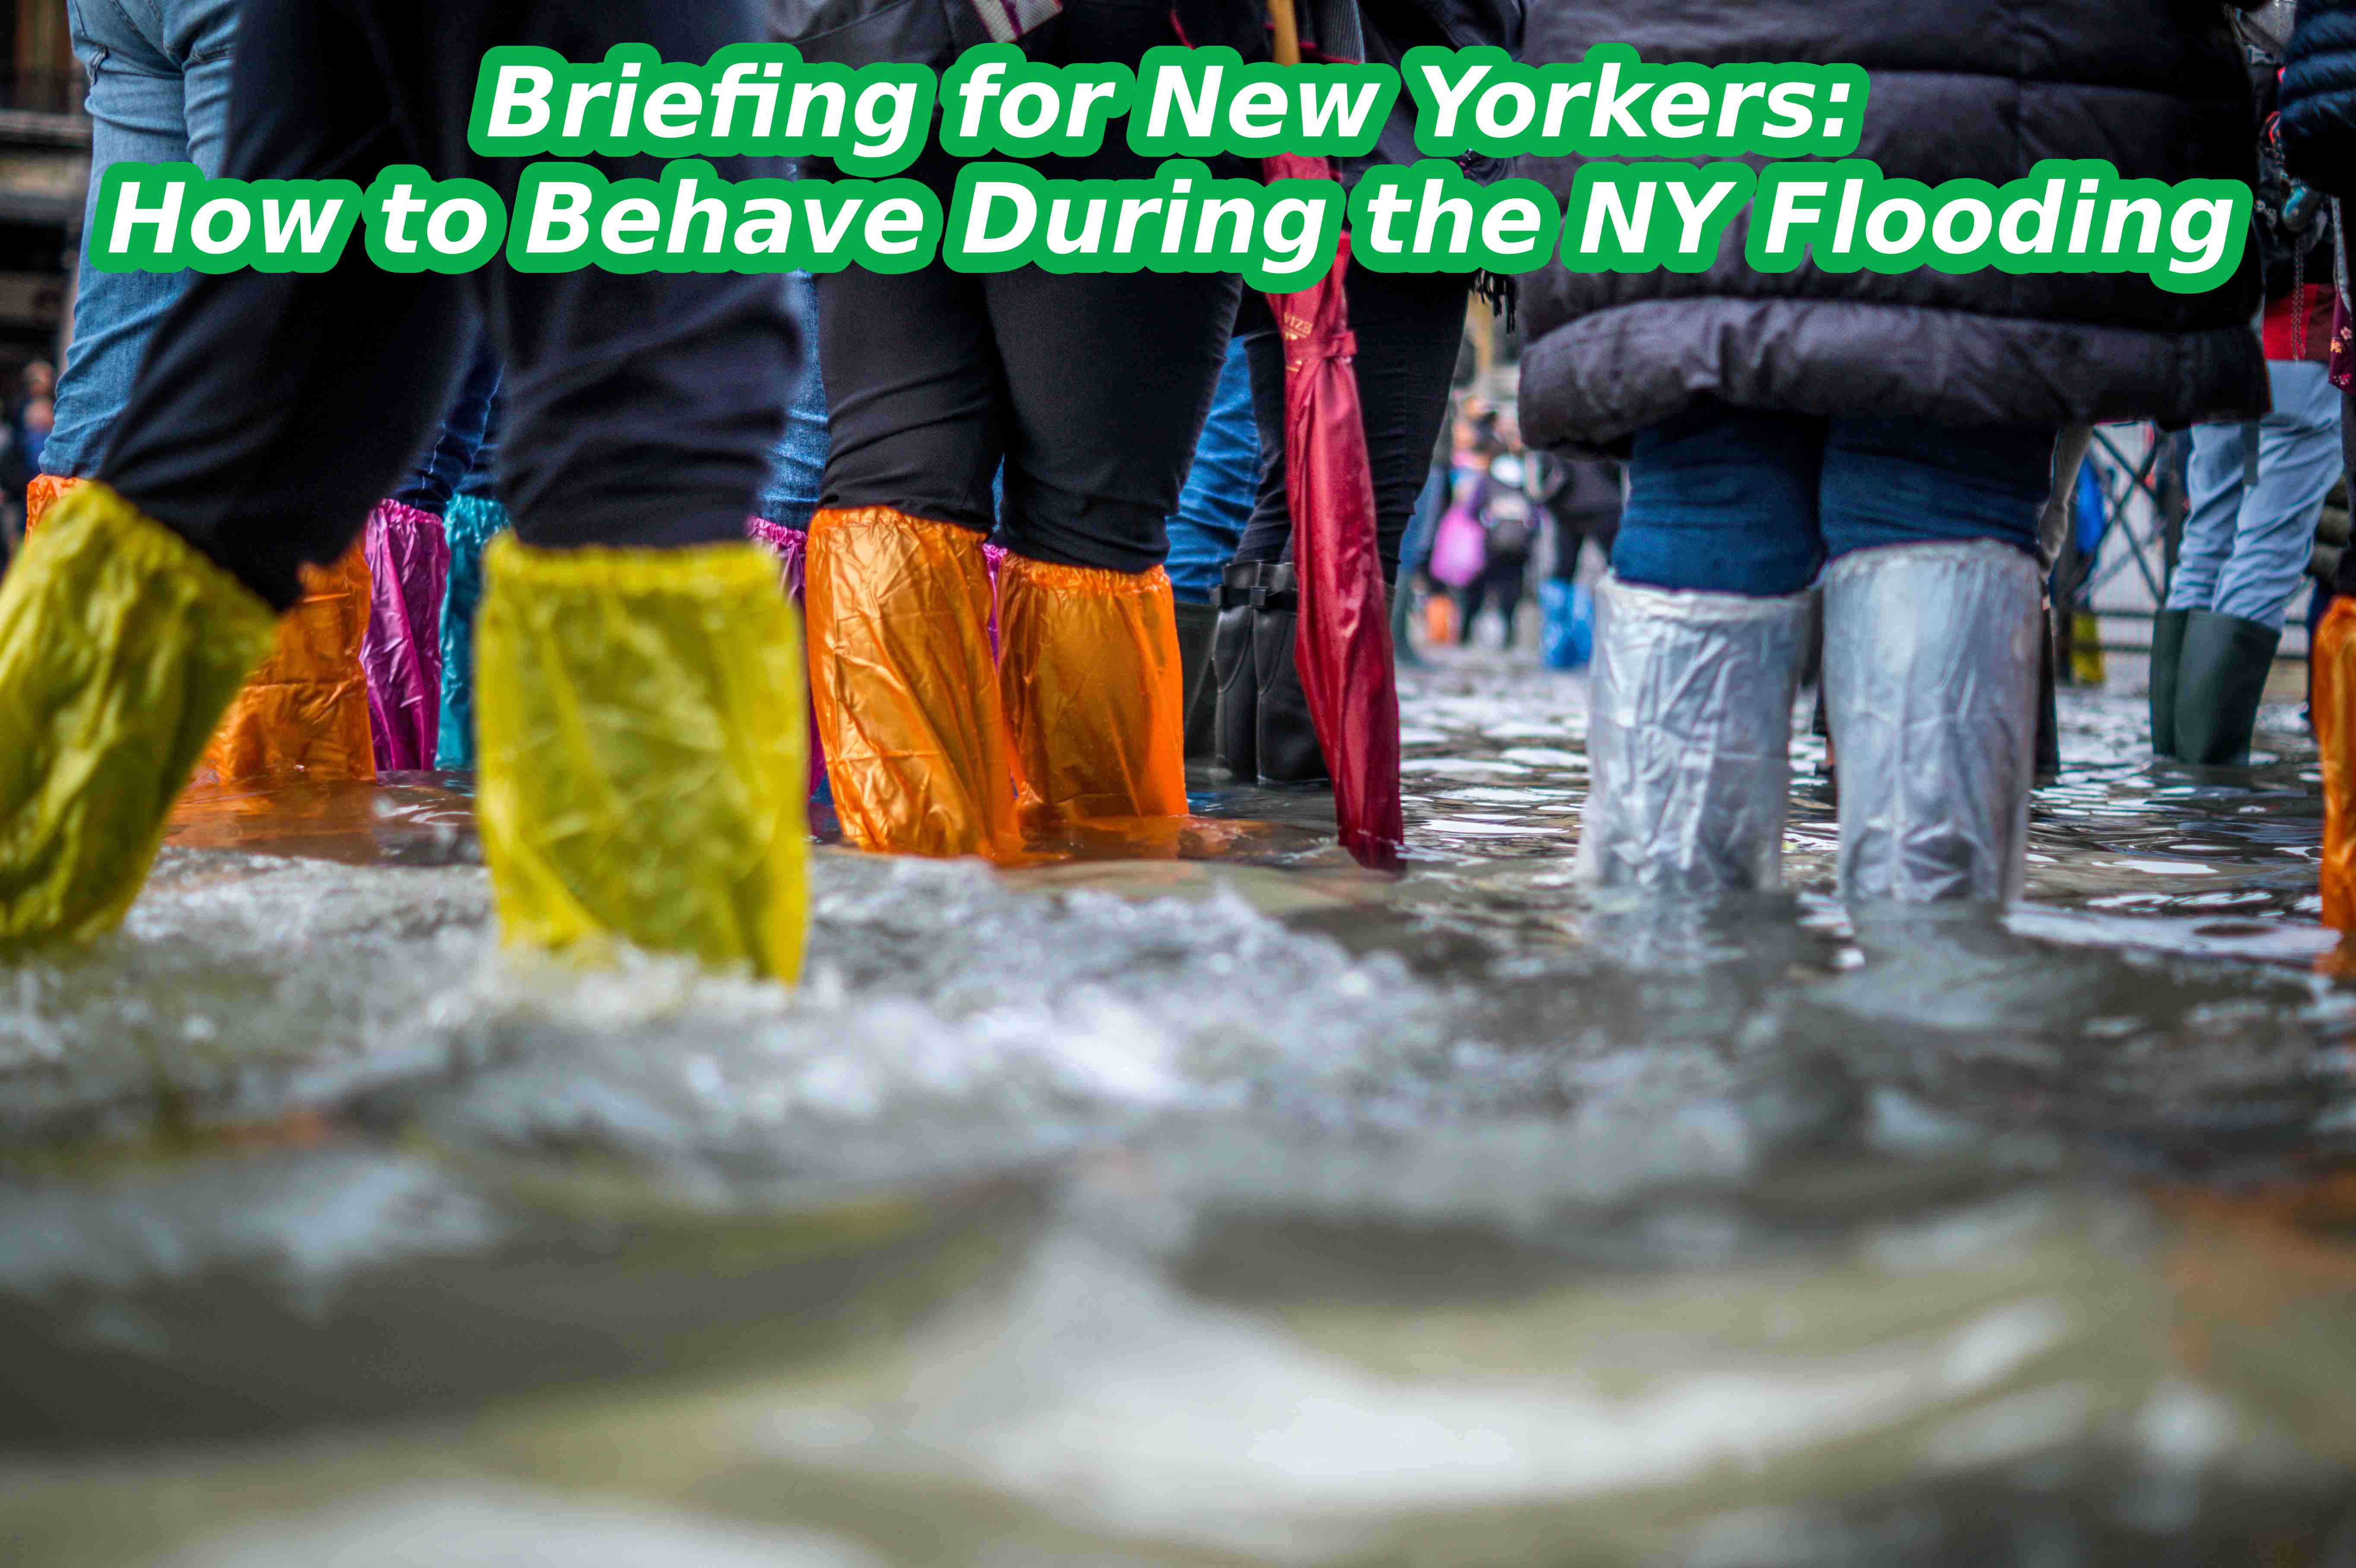 Briefing for New Yorkers: How to Behave During the NY Flooding